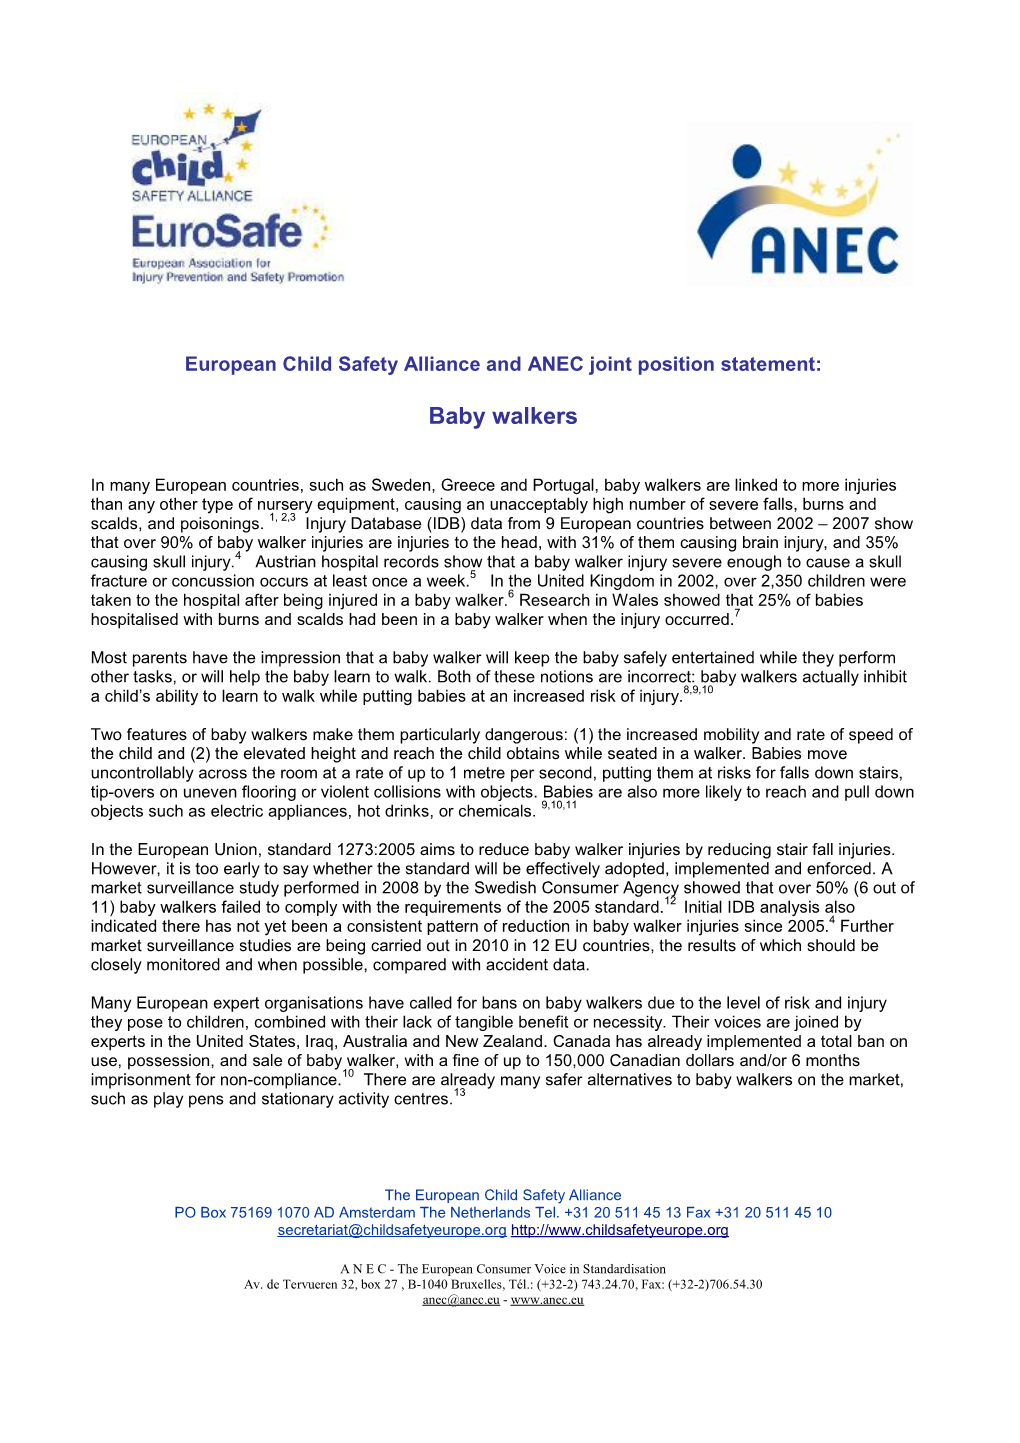 Baby Walkers : European Child Safety Alliance and ANEC Joint Position